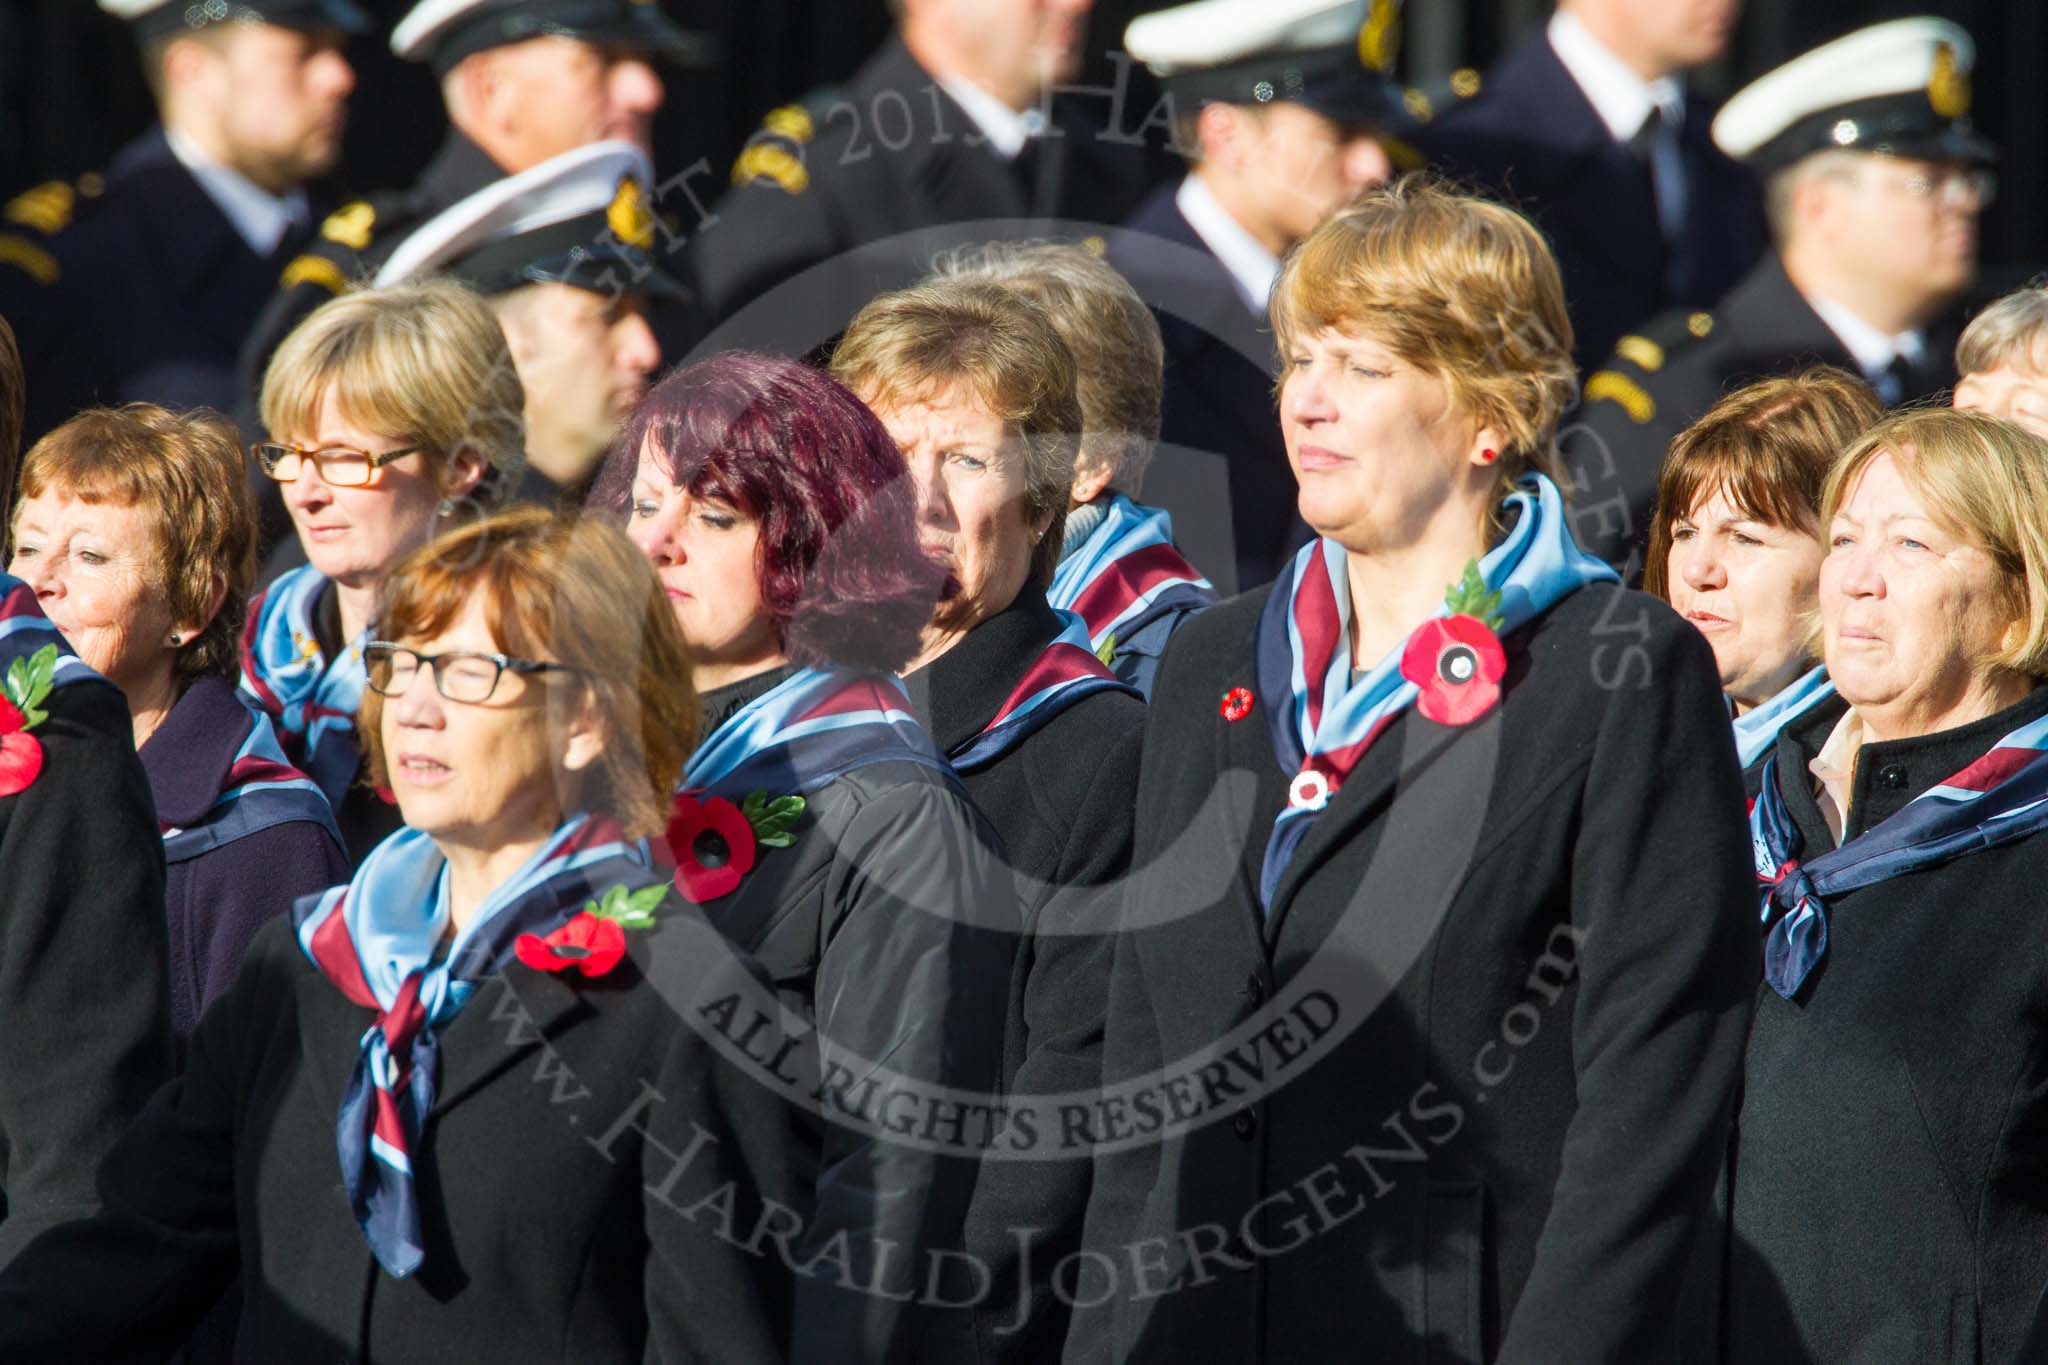 Remembrance Sunday at the Cenotaph in London 2014: Group C23 - Princess Mary's Royal Air Force Nursing Service
Association.
Press stand opposite the Foreign Office building, Whitehall, London SW1,
London,
Greater London,
United Kingdom,
on 09 November 2014 at 11:41, image #196